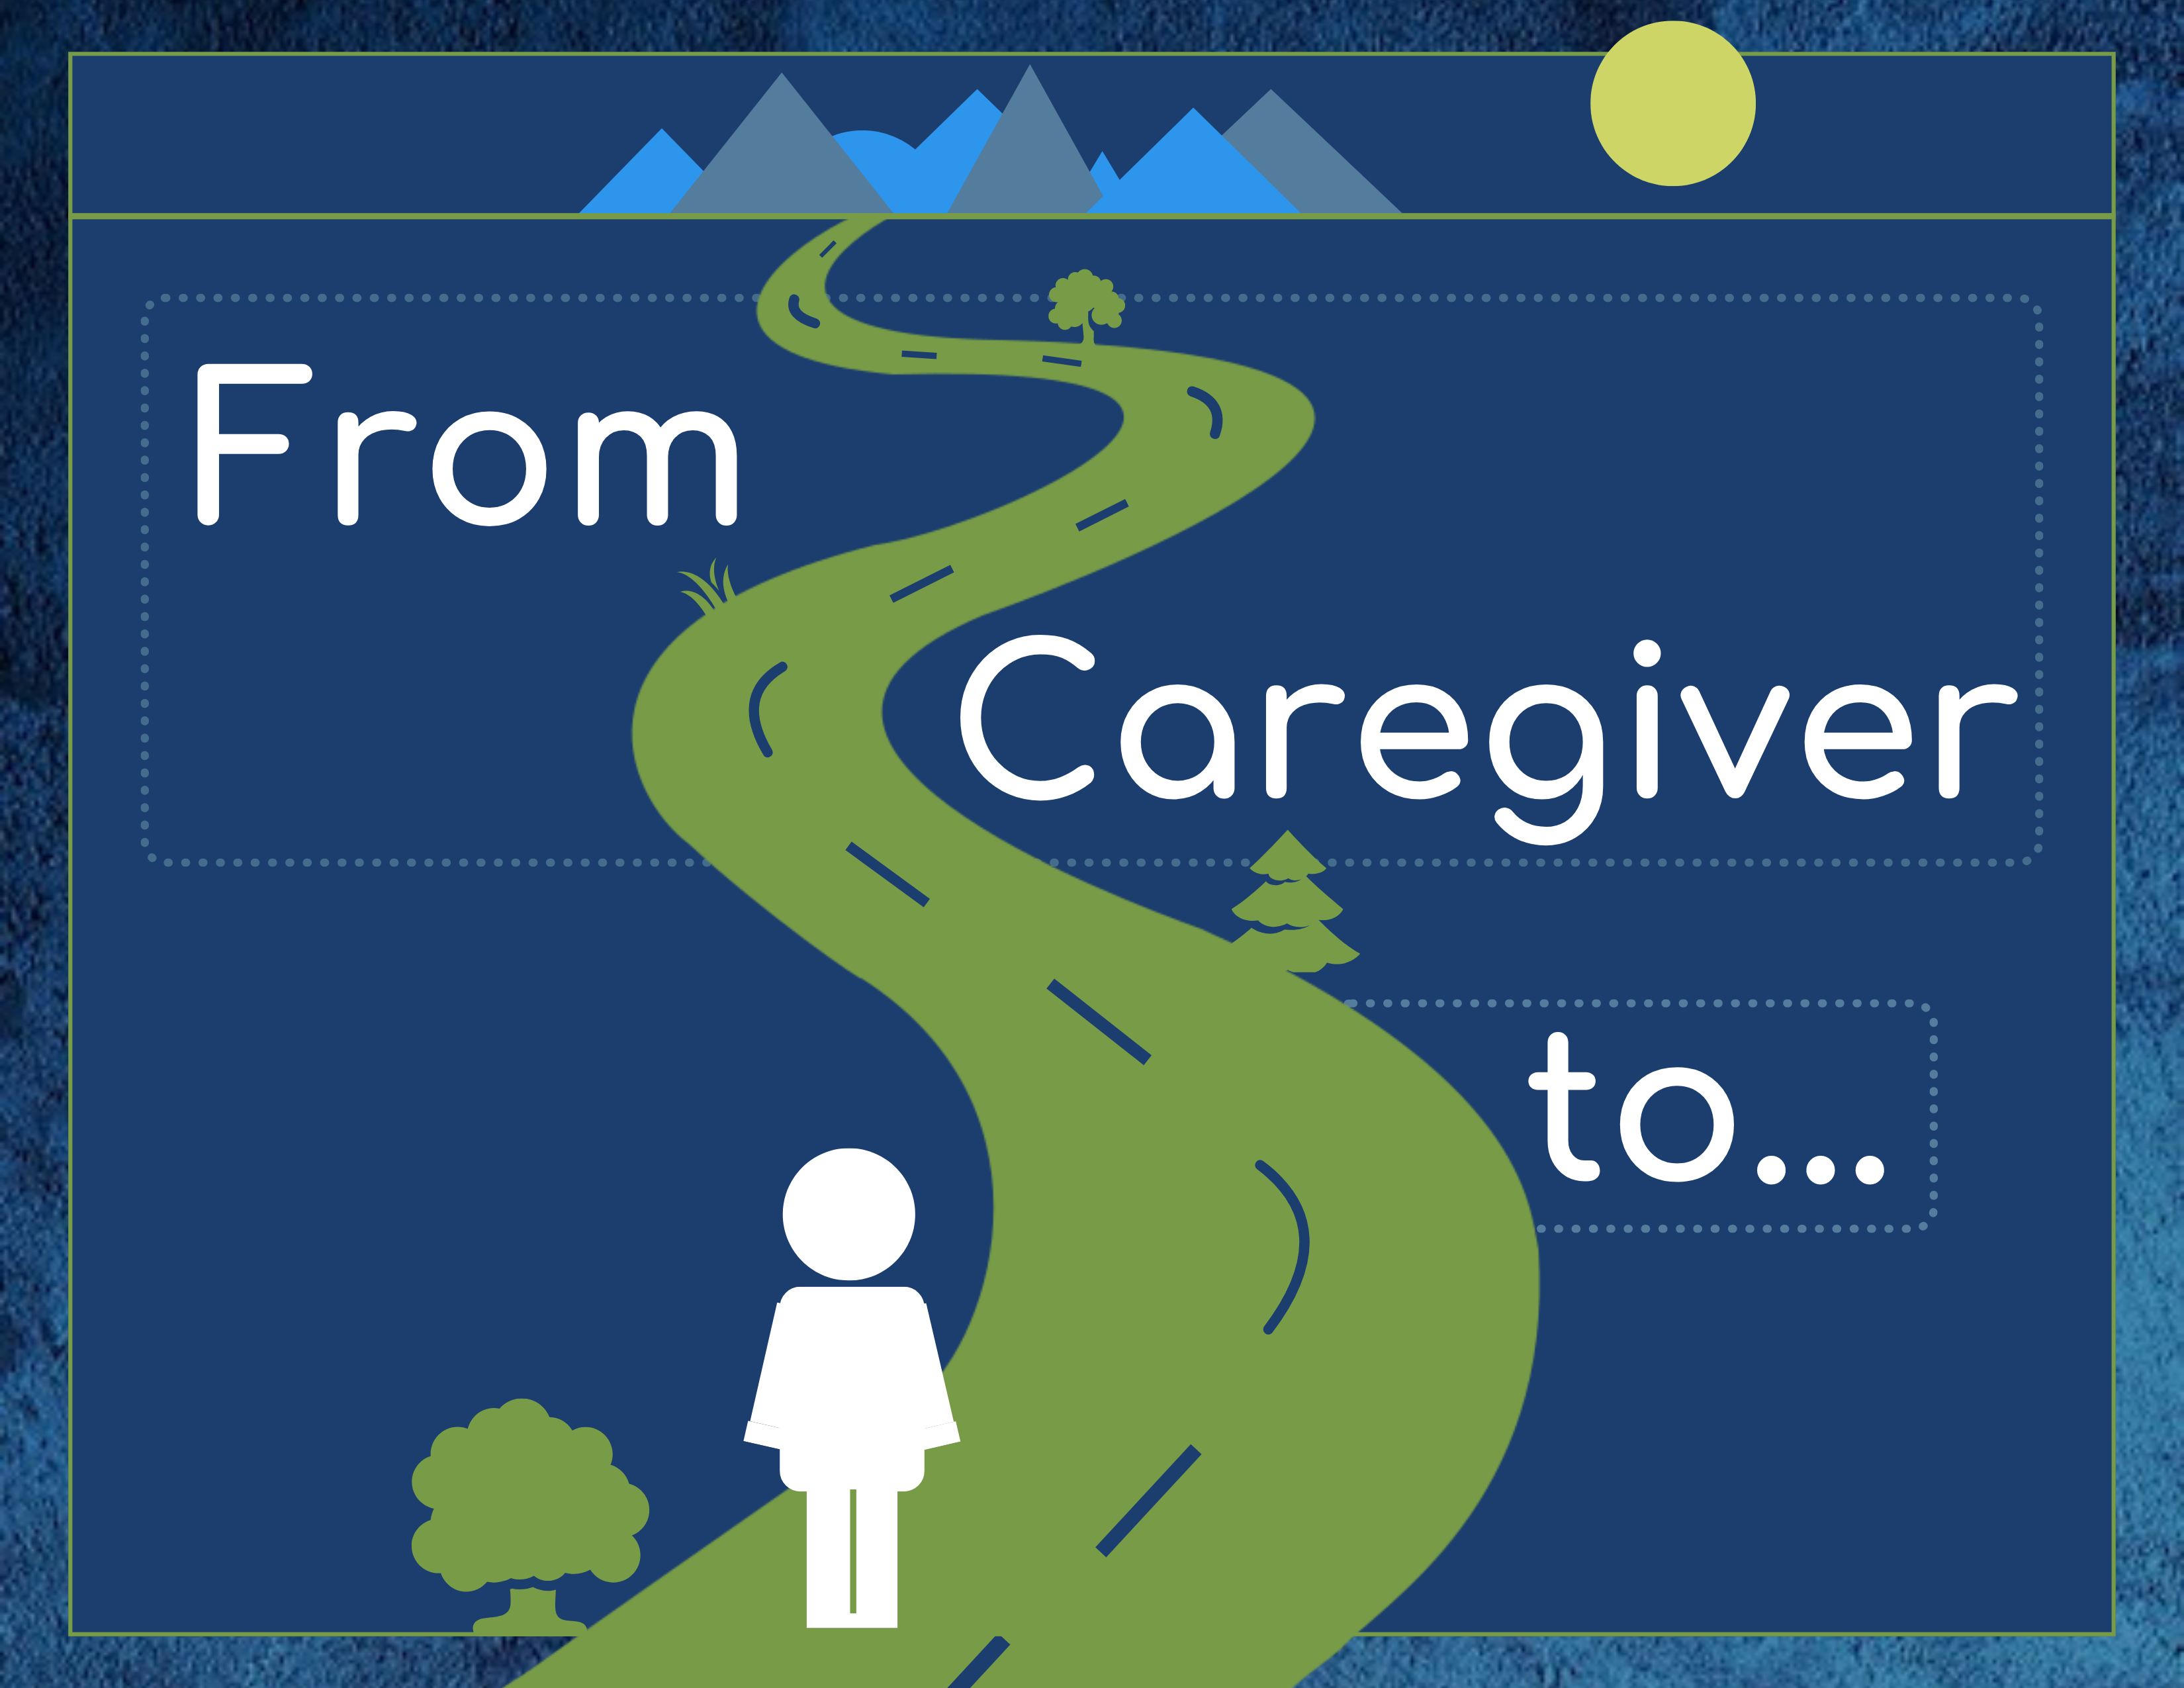 From Caregiver to...